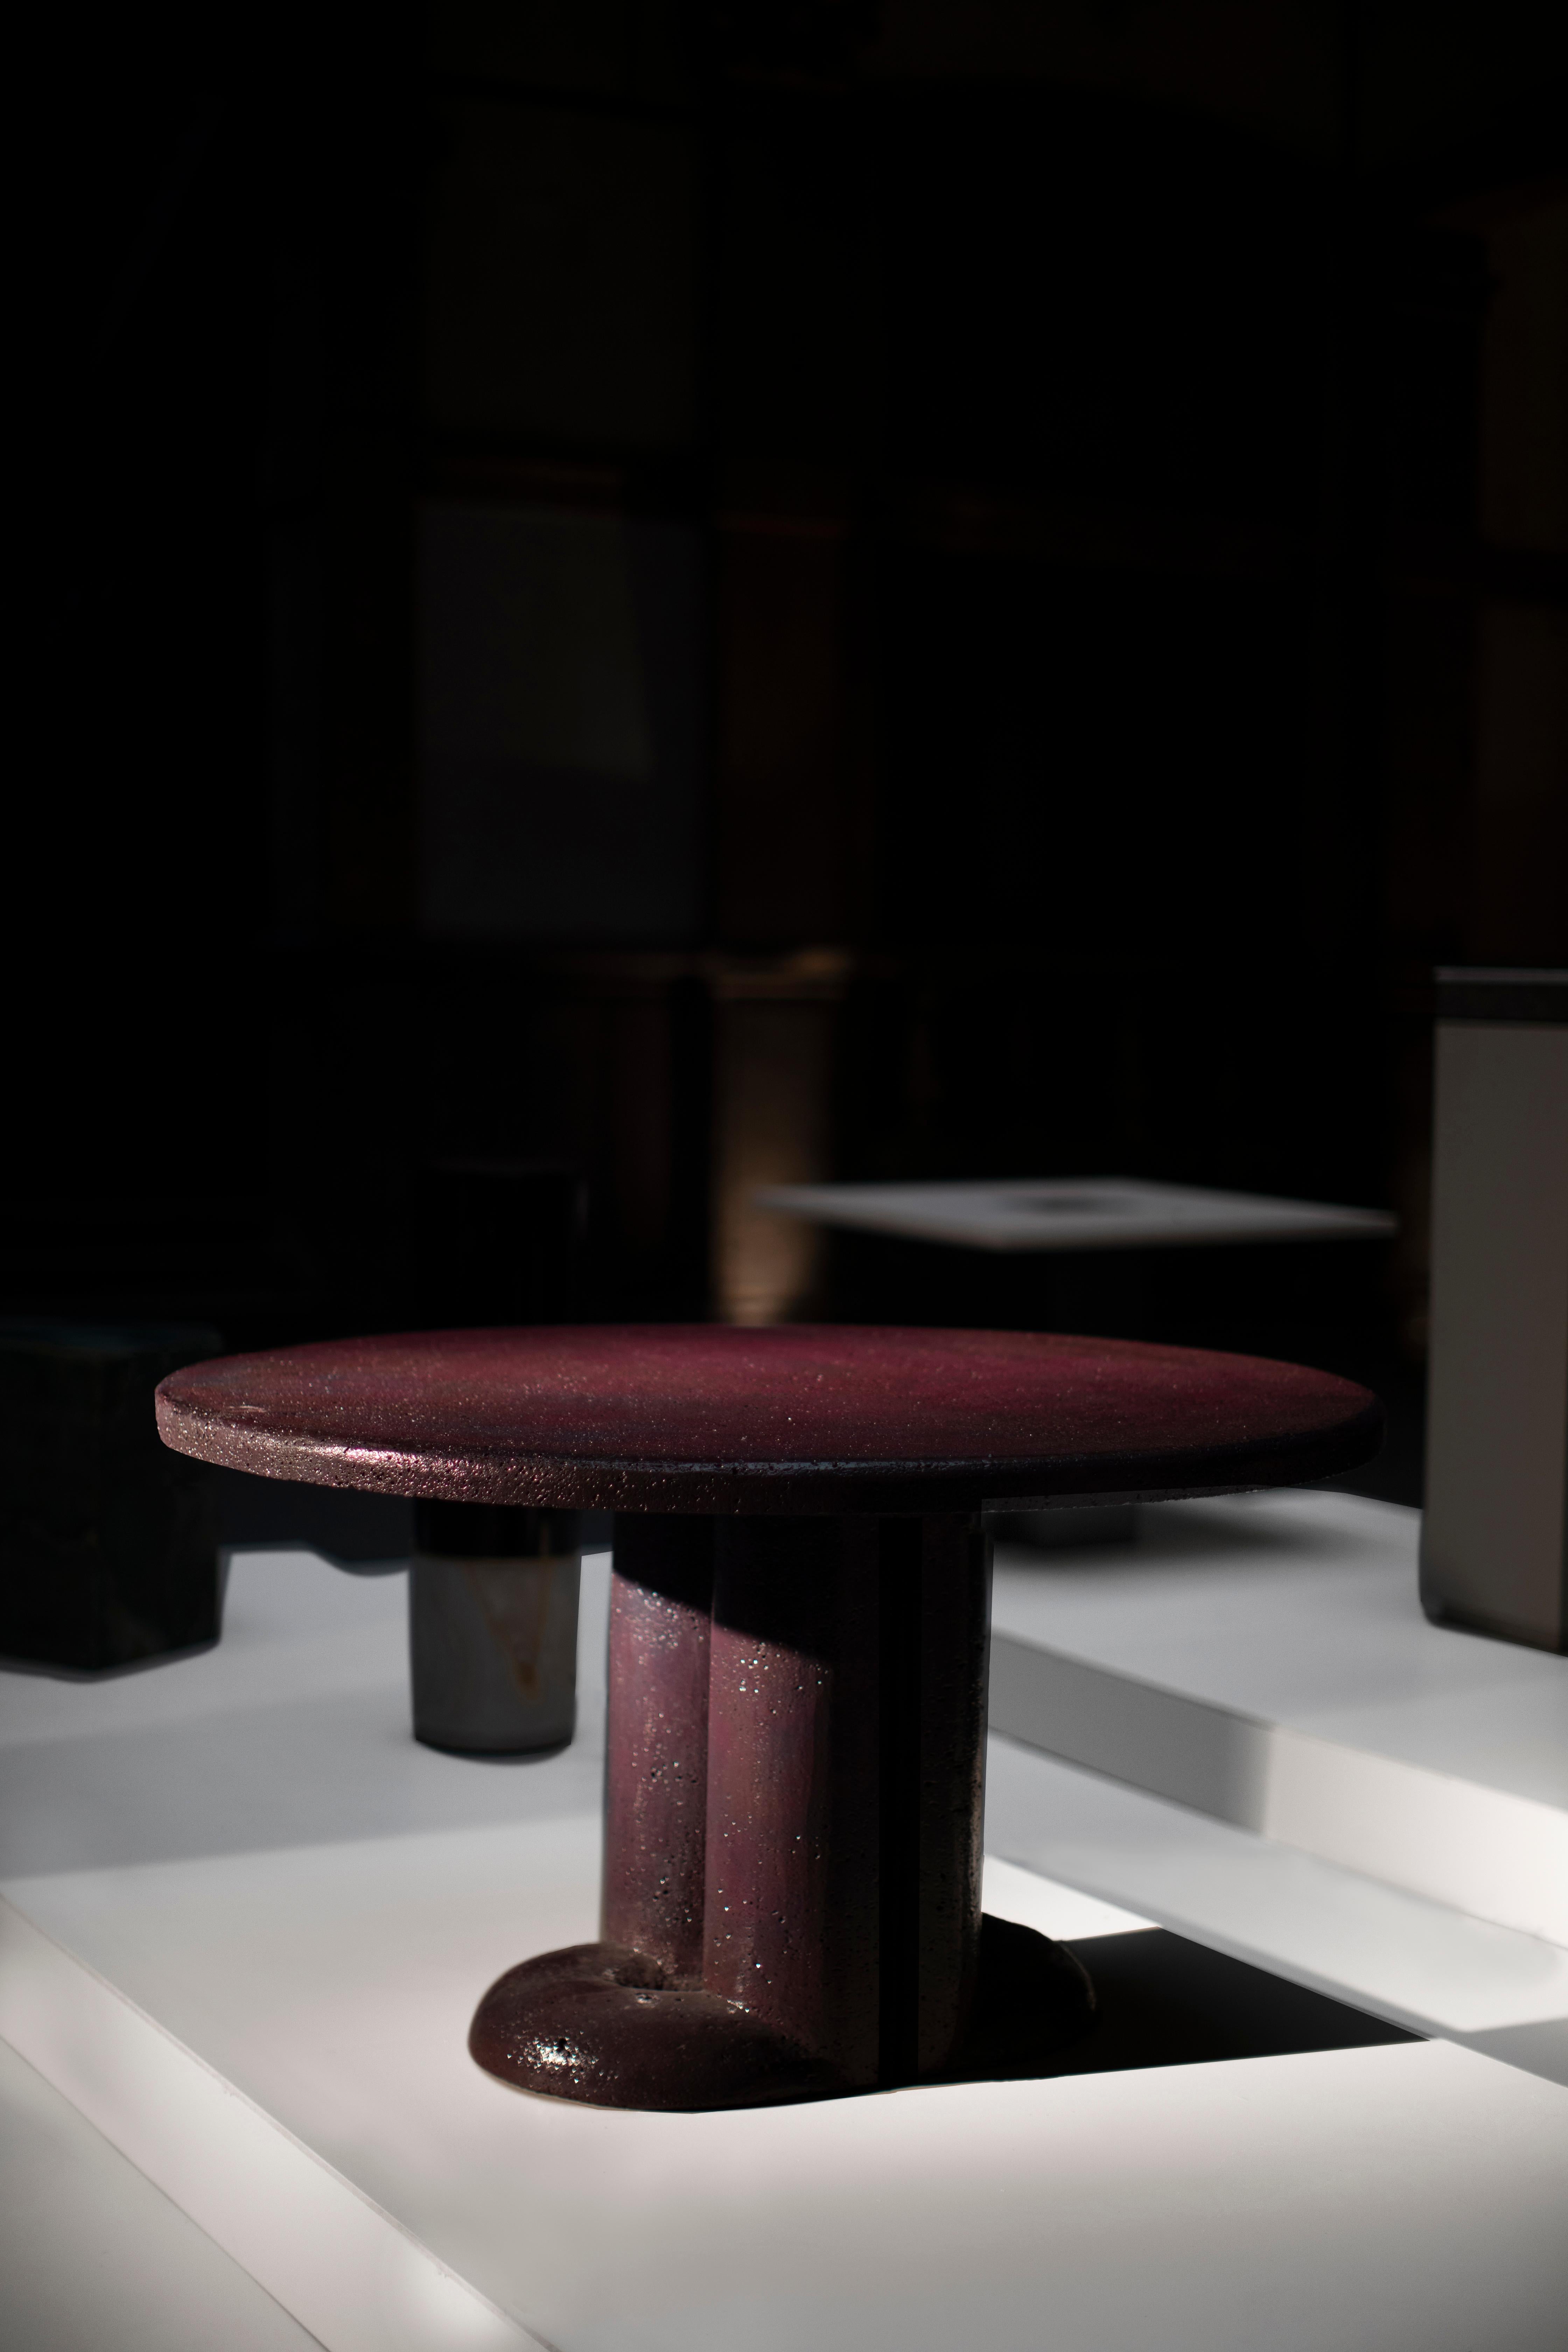 Mullunu Dining Table (2020) by Ian Felton
Hand carved lava stone with glossy ceramic color glaze
Limited Edition 15

Mullunu dining table, a bold statement piece that —like vivid dreams— arouses indelible impressions on its viewer and becomes an